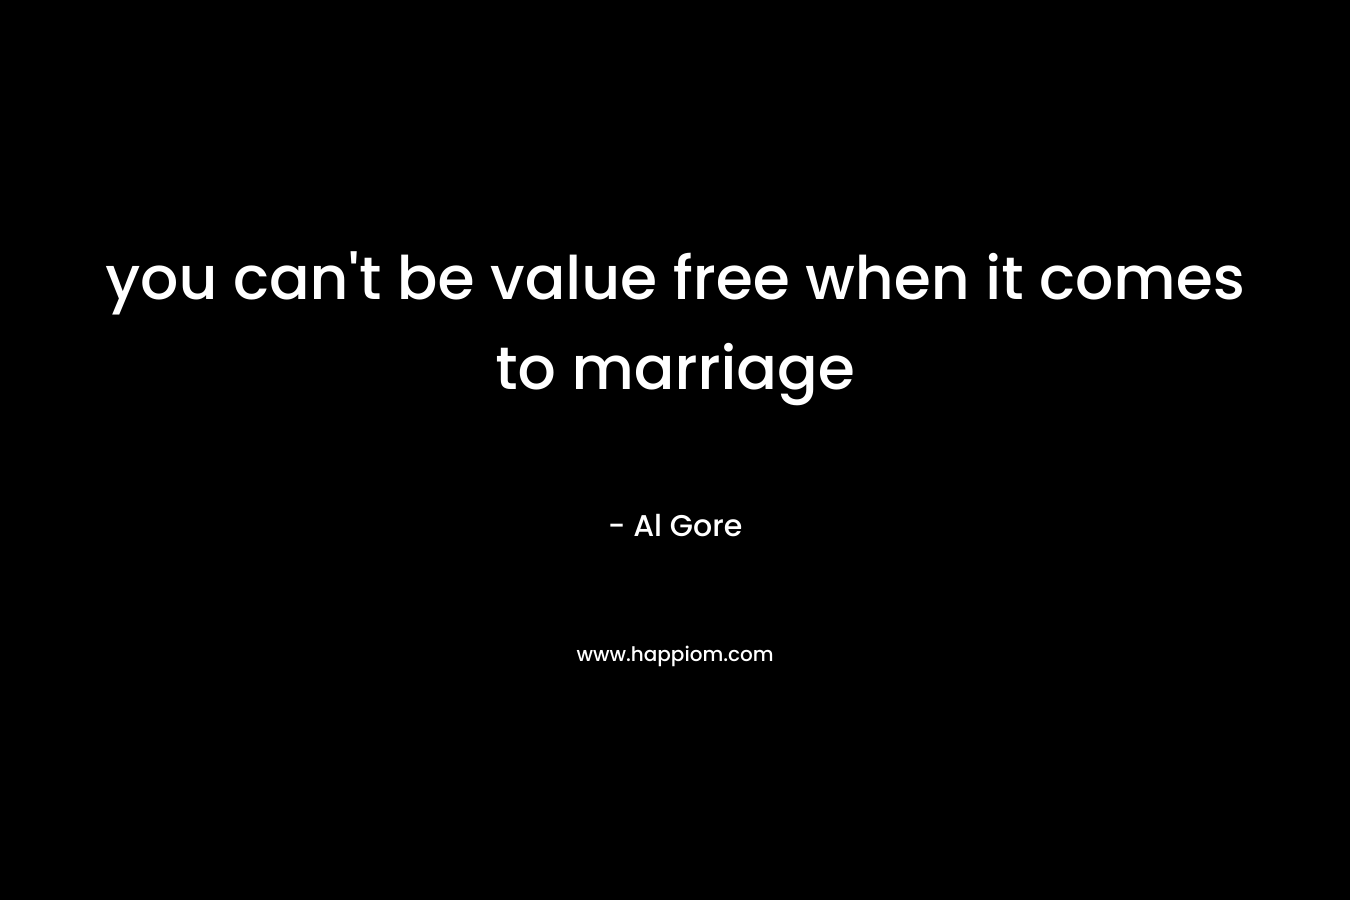 you can't be value free when it comes to marriage